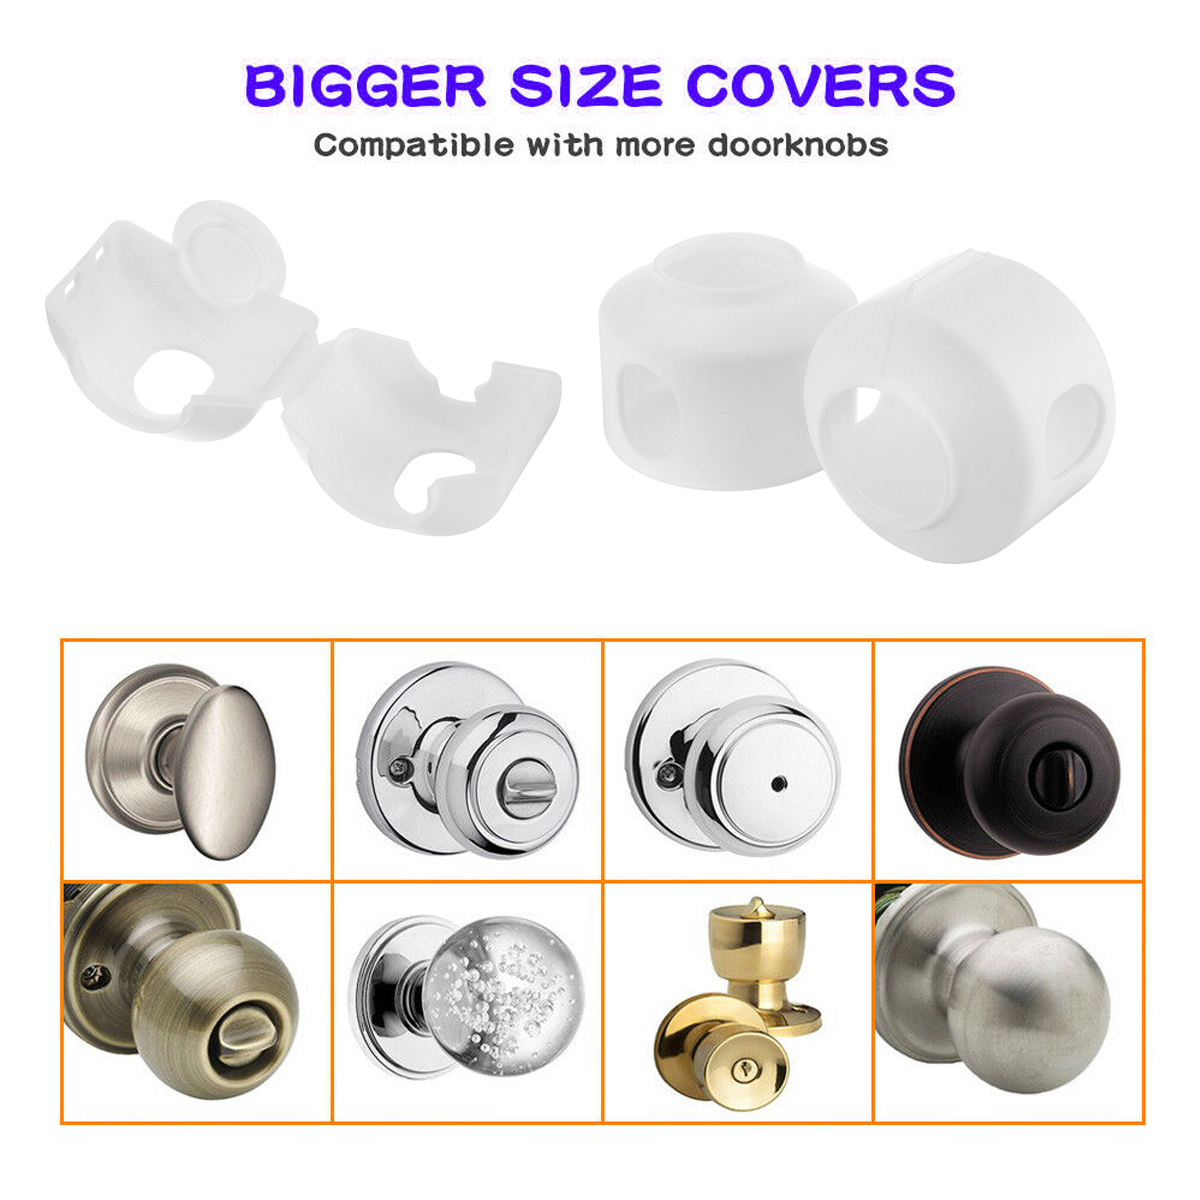 5PCS-Child-Proof-Safety-Doors-Handle-Bedroom-Protective-Door-Knob-Safety-Cover-Lockable-1730878-5